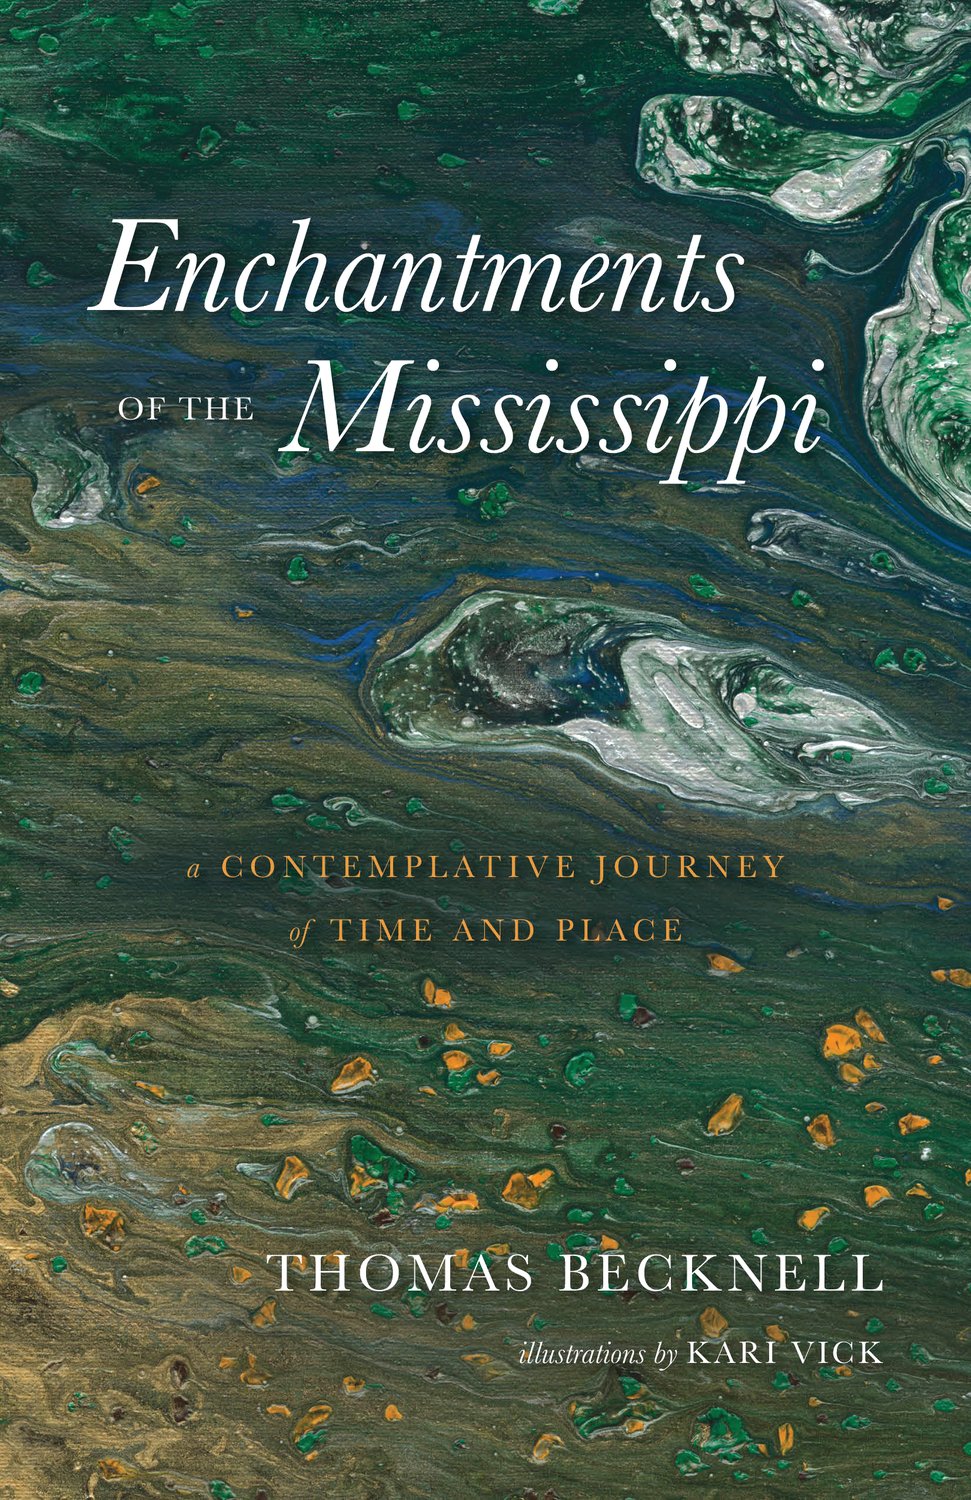 Thomas Becknell takes the reader with him on his exploration of the Mississippi, and provides a sense of place and an understanding of his fascination with the river. “I’d like to think I’ve told a story of falling in love with the currents of time, the beauty of life, and the consolation of the spirit,” he said. (Photo submitted)